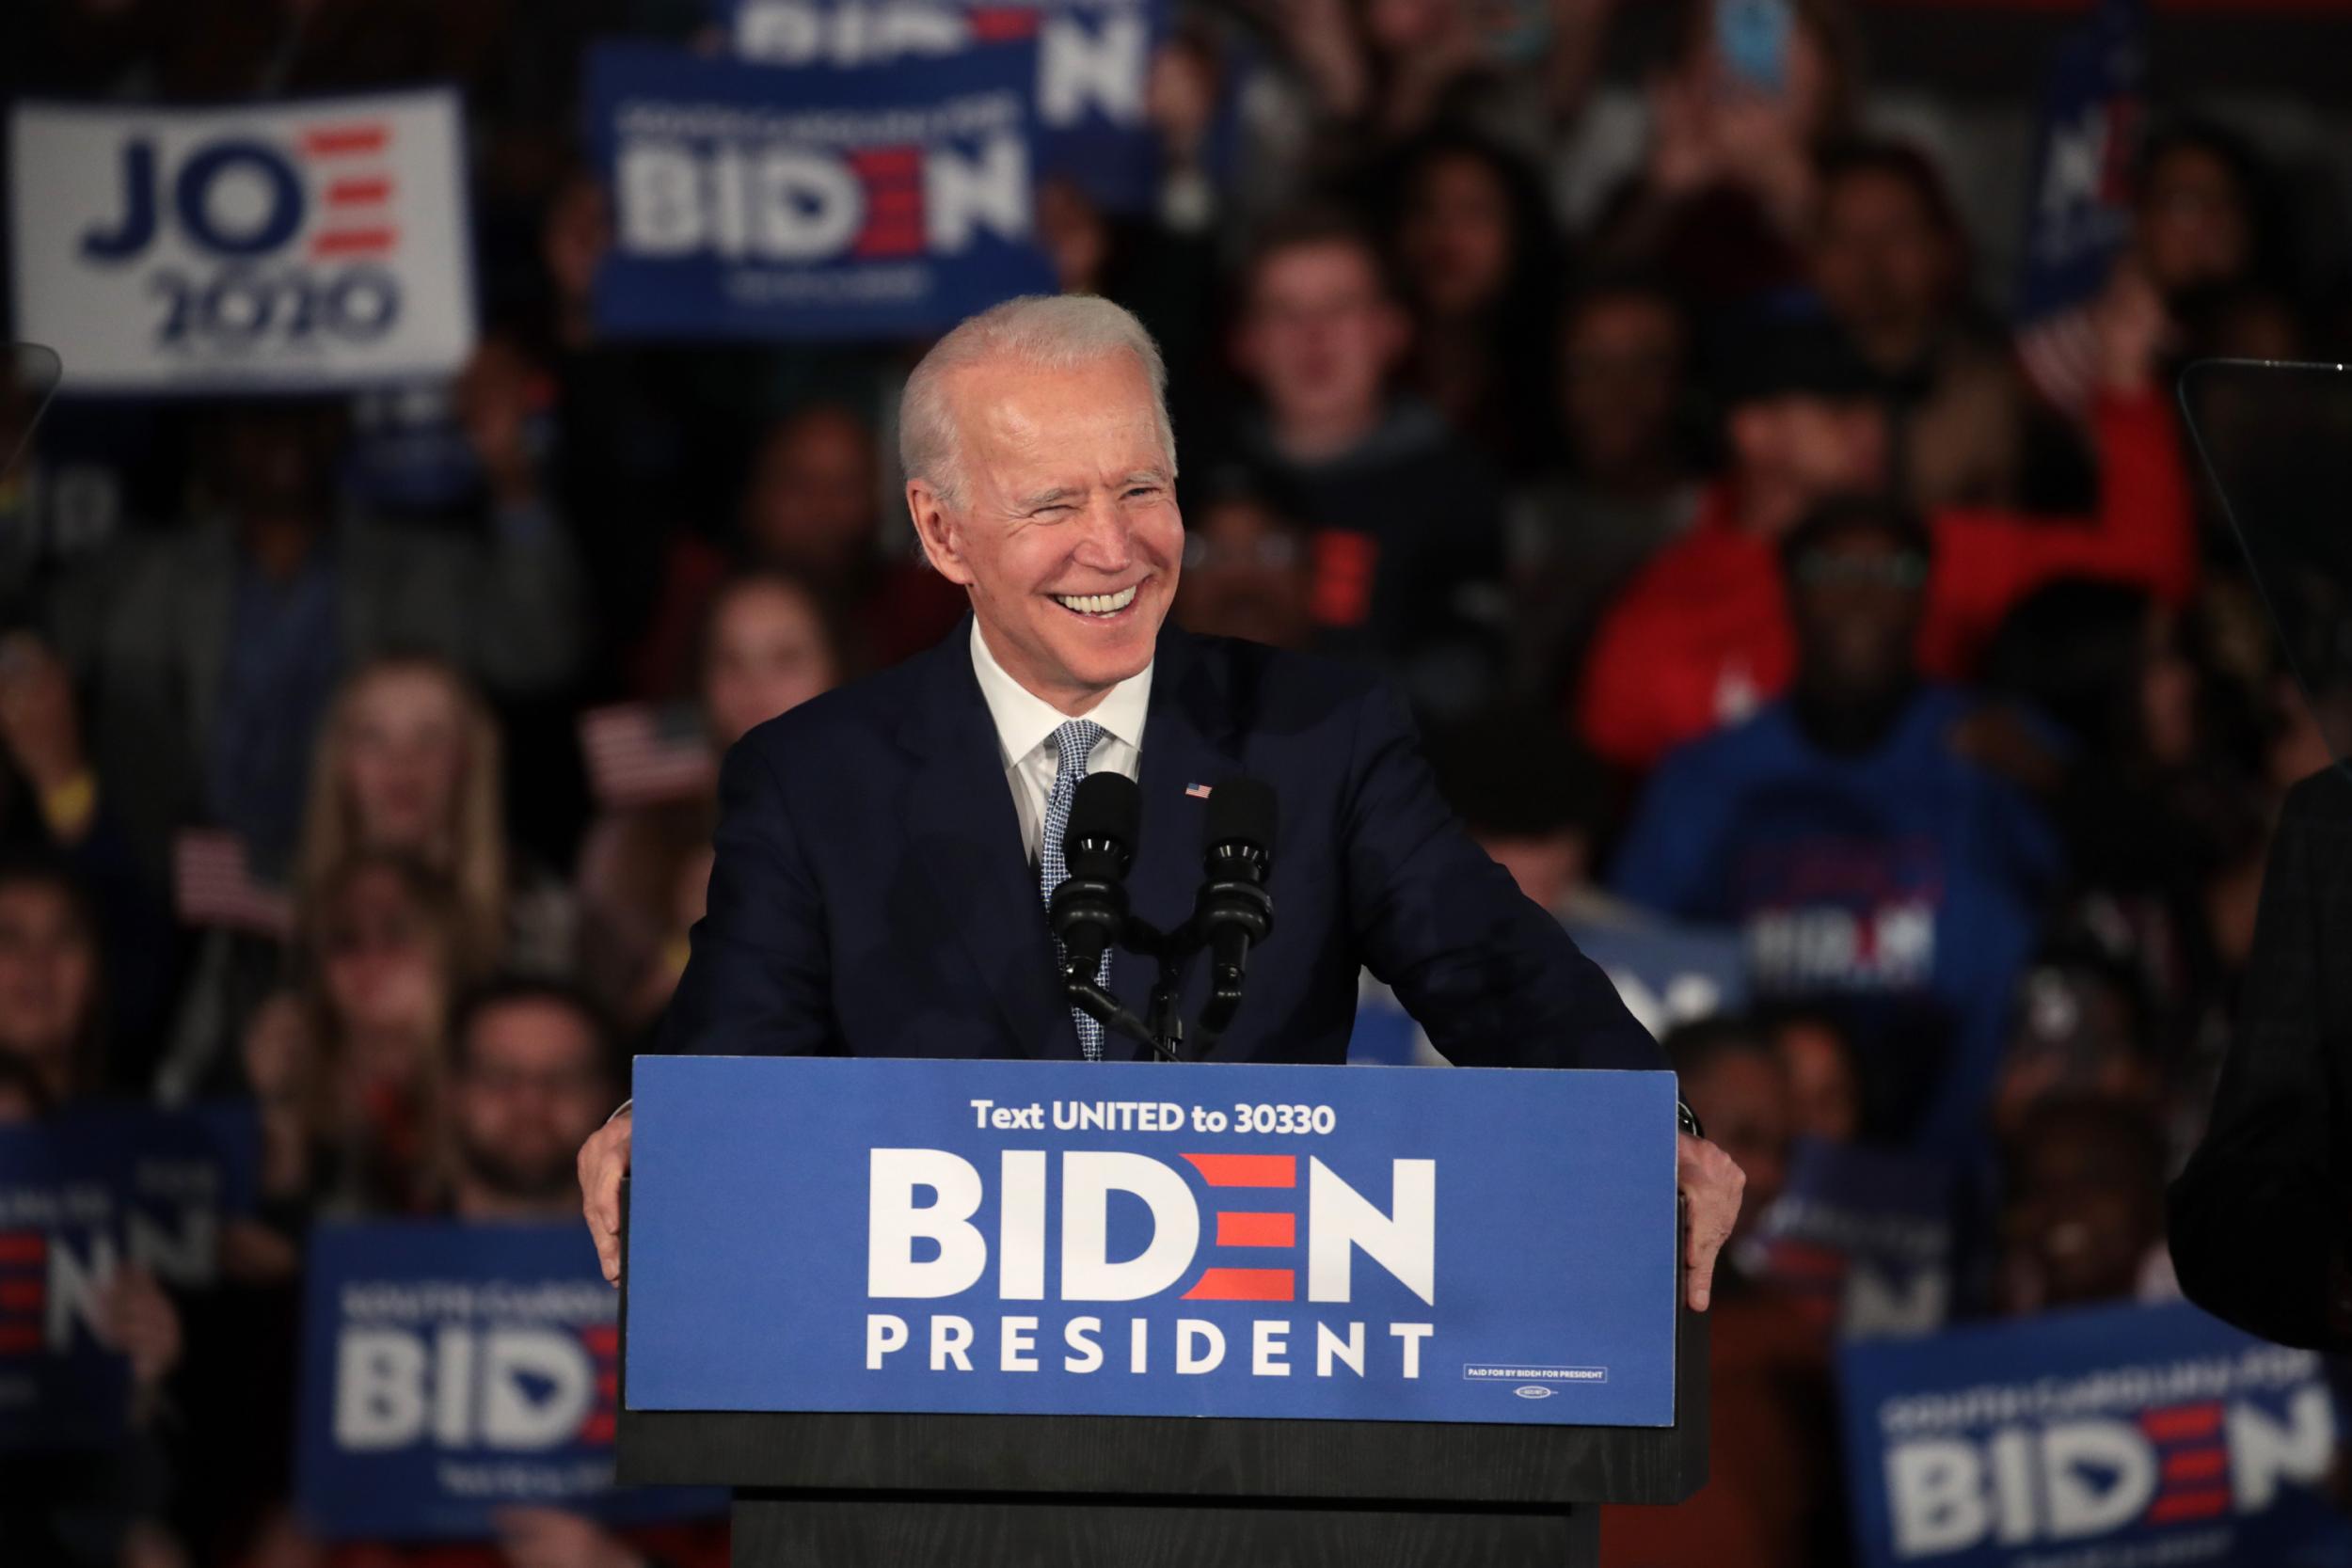 'Just watch me': Biden bets on South Carolina momentum to beat Sanders on Super Tuesday